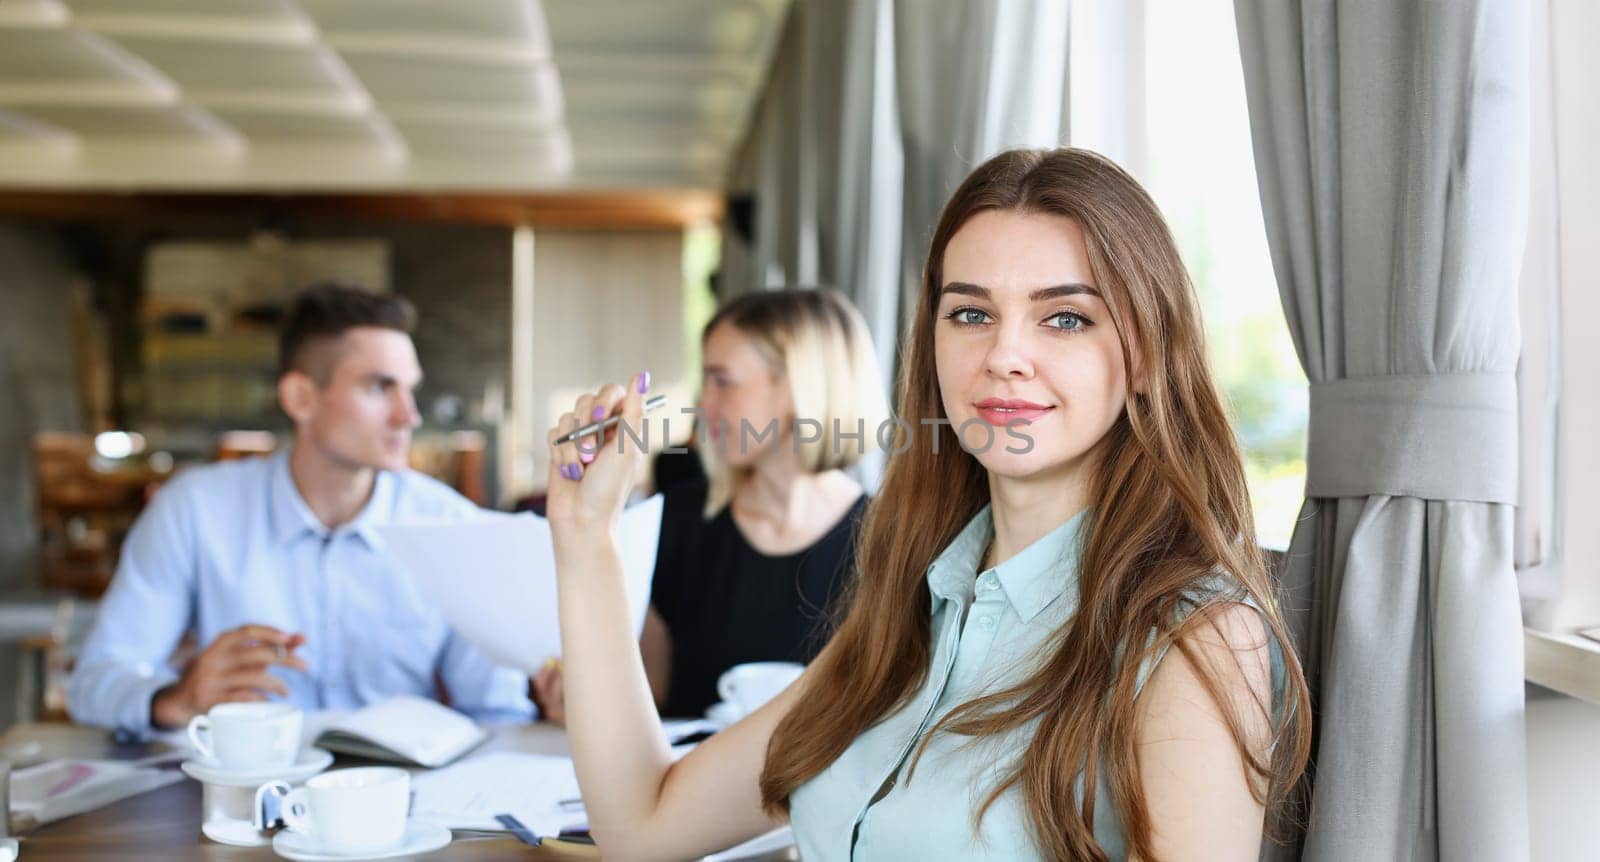 Beautiful smiling cheerful girl at cafe look in camera with colleagues group in background. White collar worker at workspace job offer modern lifestyle client visit profession train concept